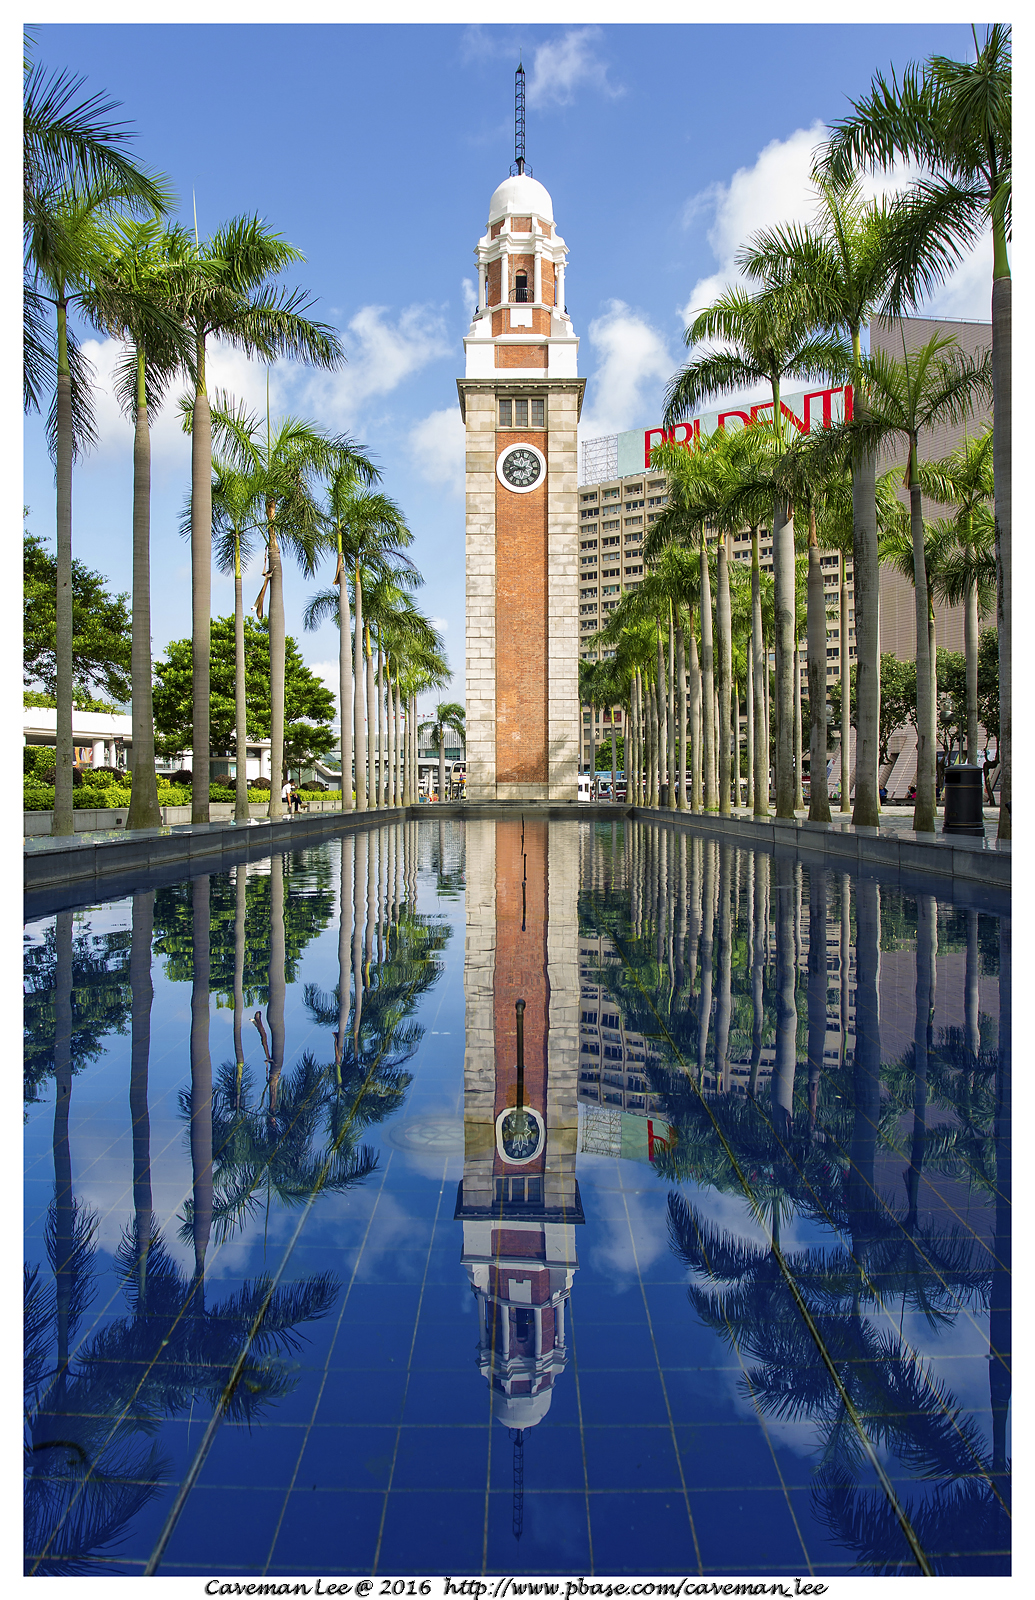 Reflection of the Clock Tower